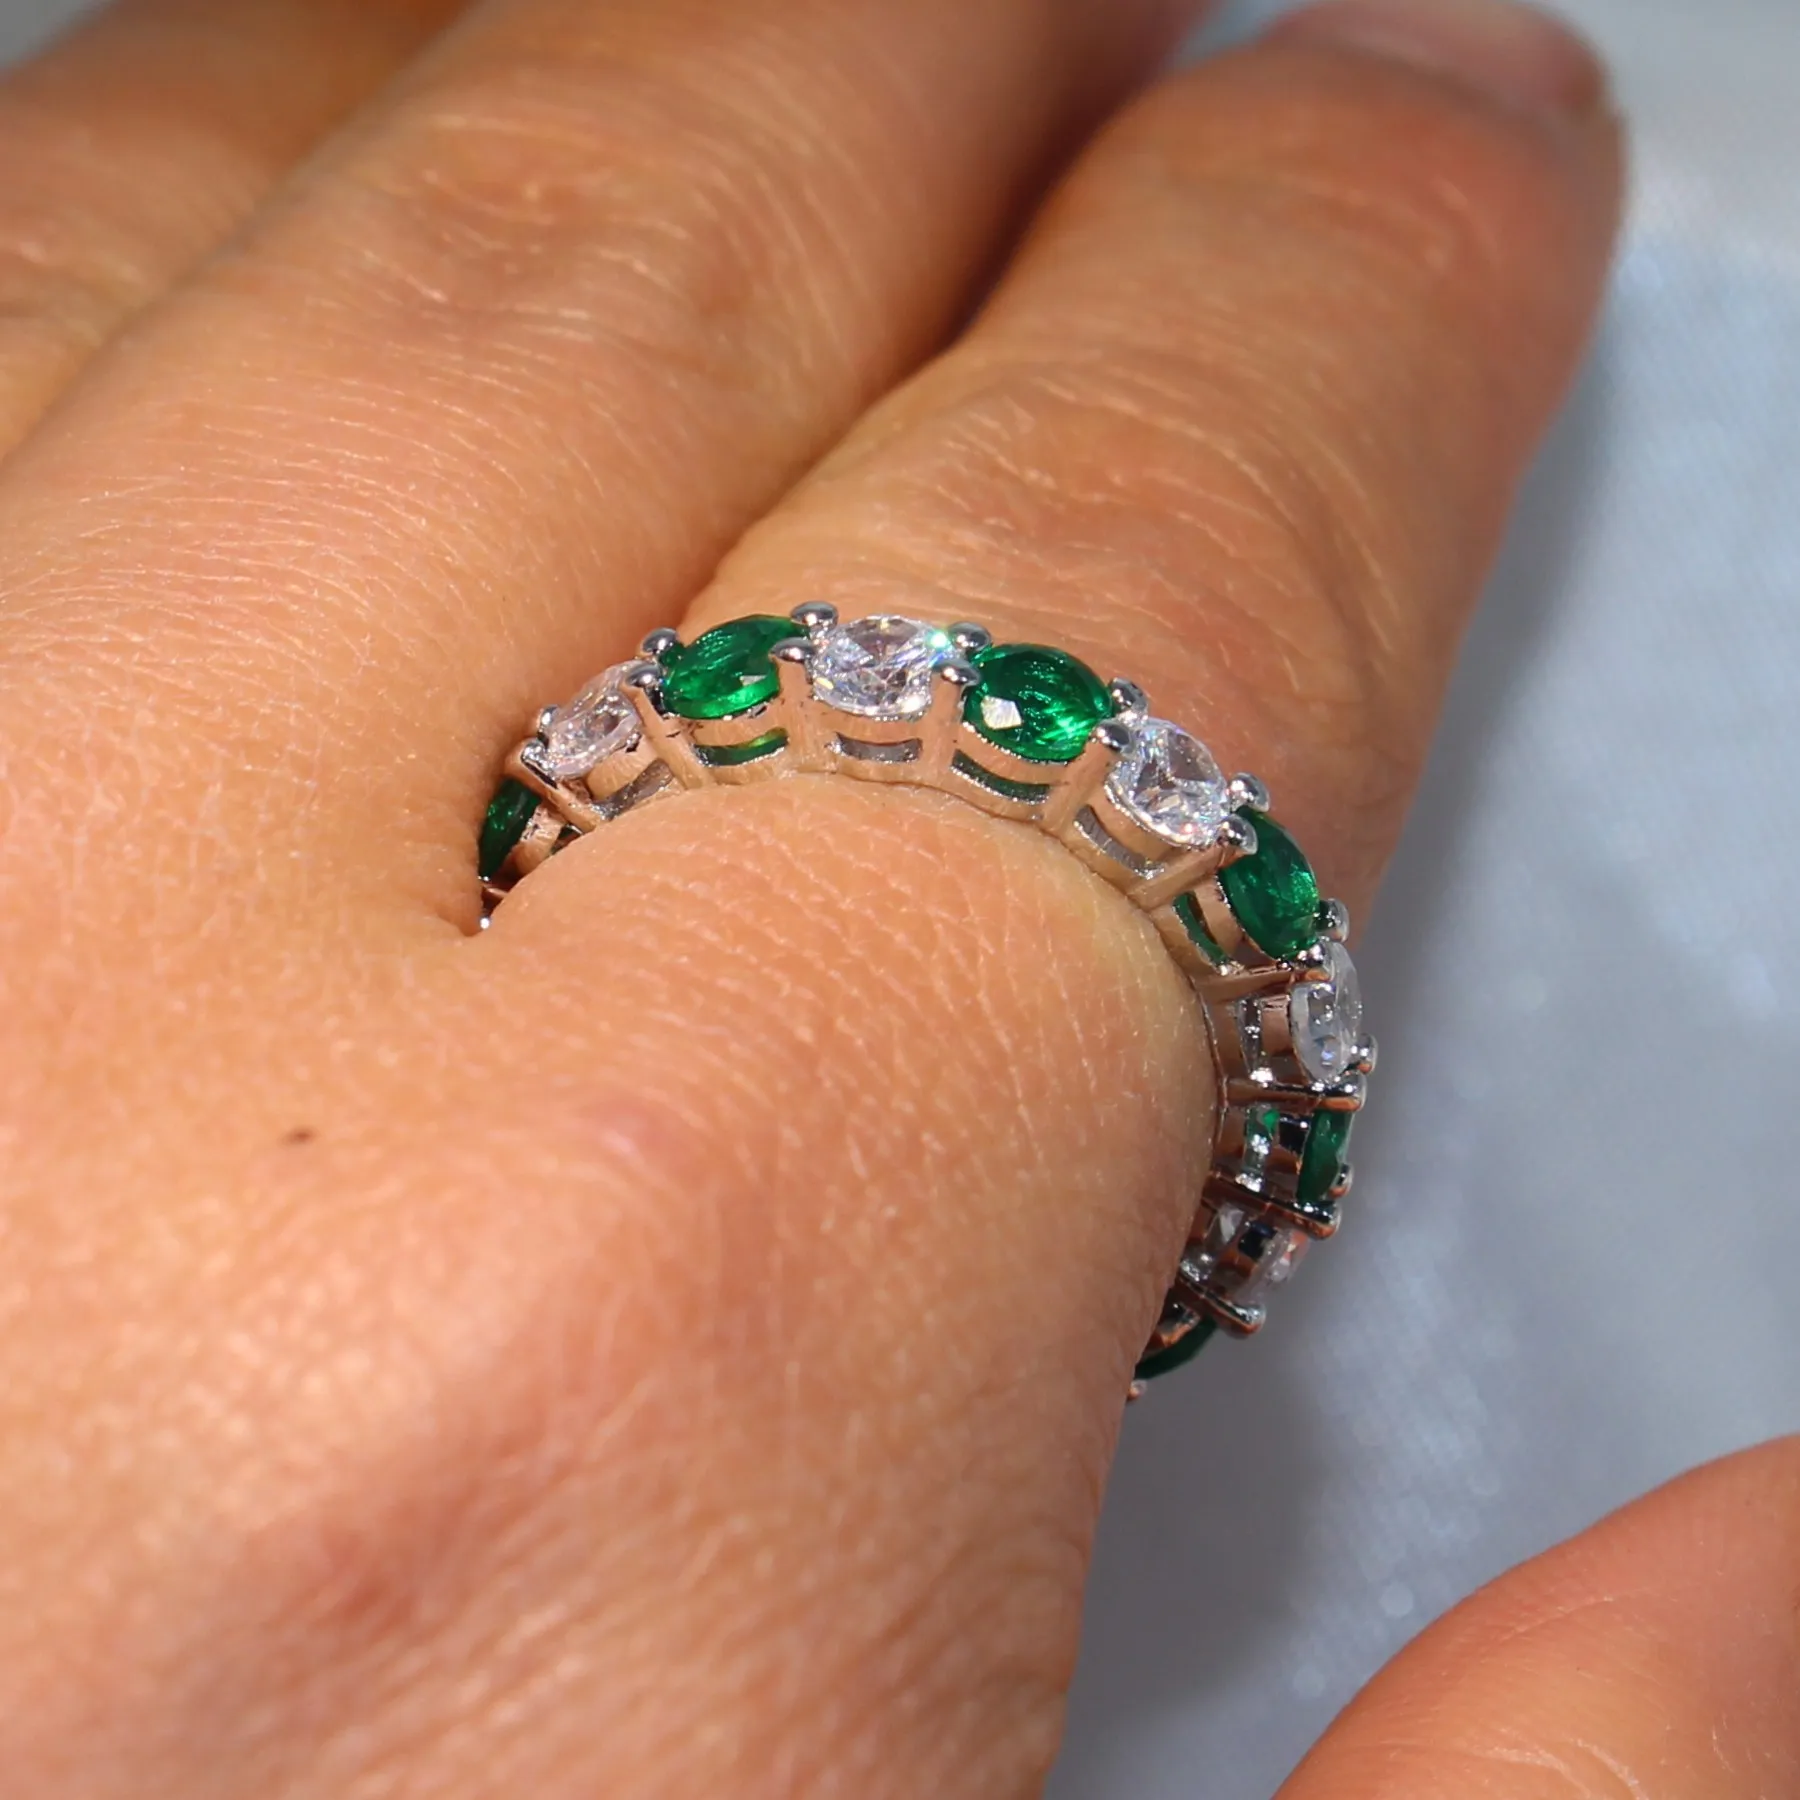 2018 Sparkling Brand New Luxury Jewelry 925 Sterling Silver Round Cut Emerald Zirconia Women Wedding Band Band Circle Ring 3115888